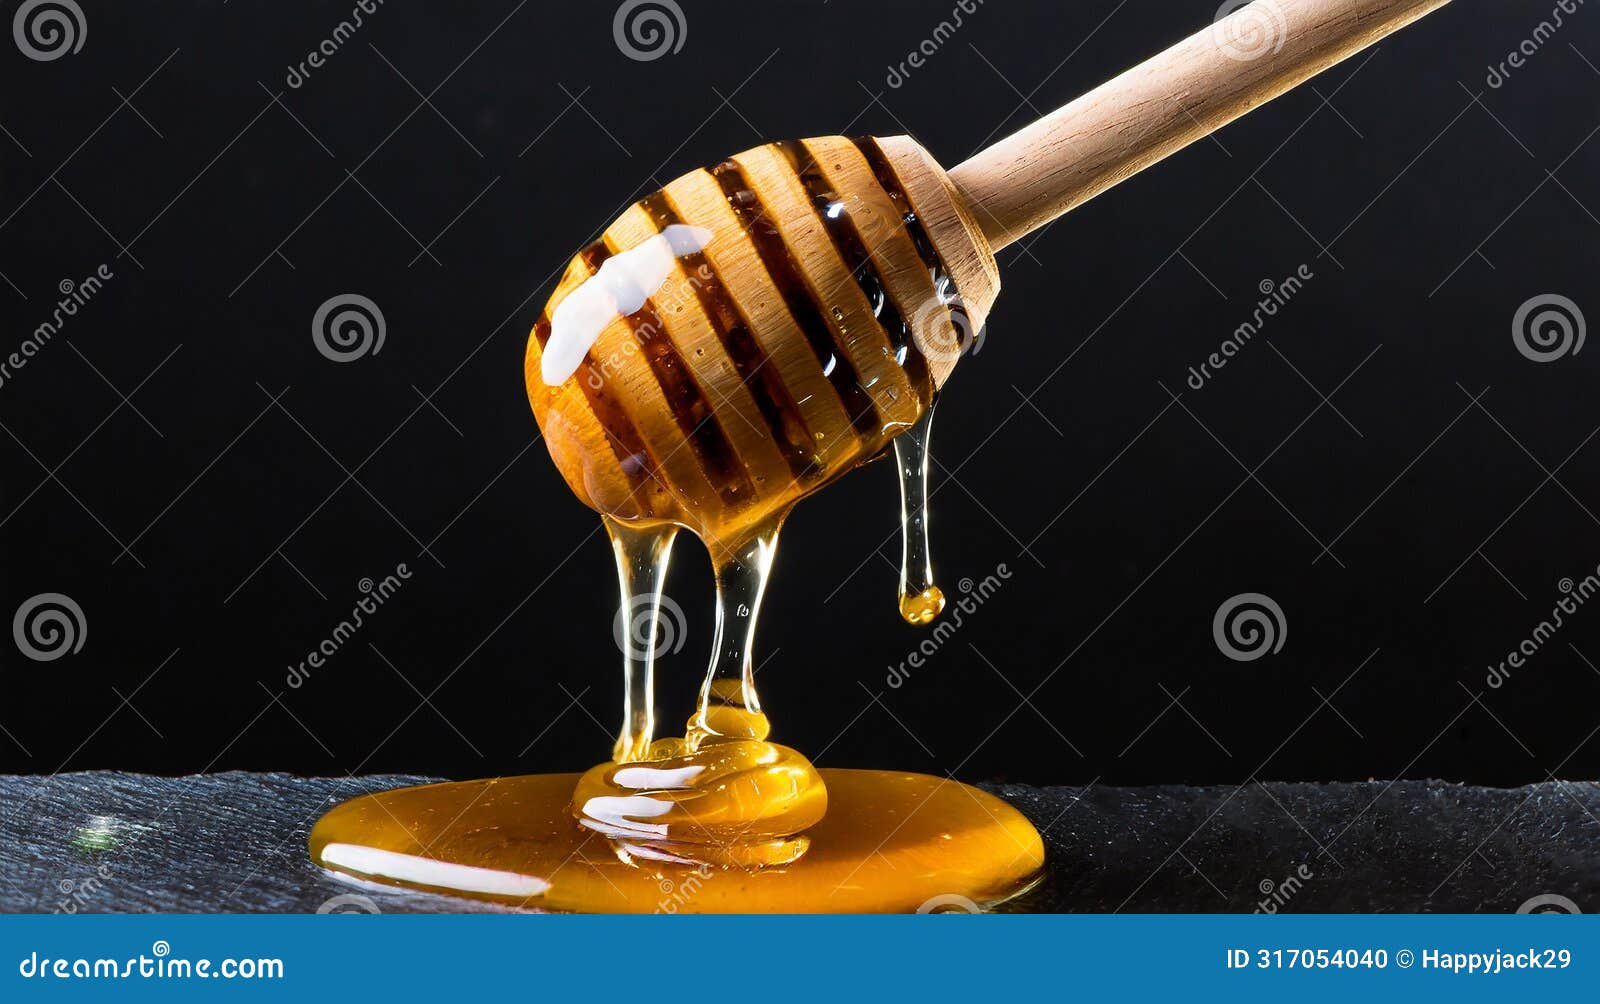 sweet viscous honey made by bees dripping from wooden dipper with spaced grooves